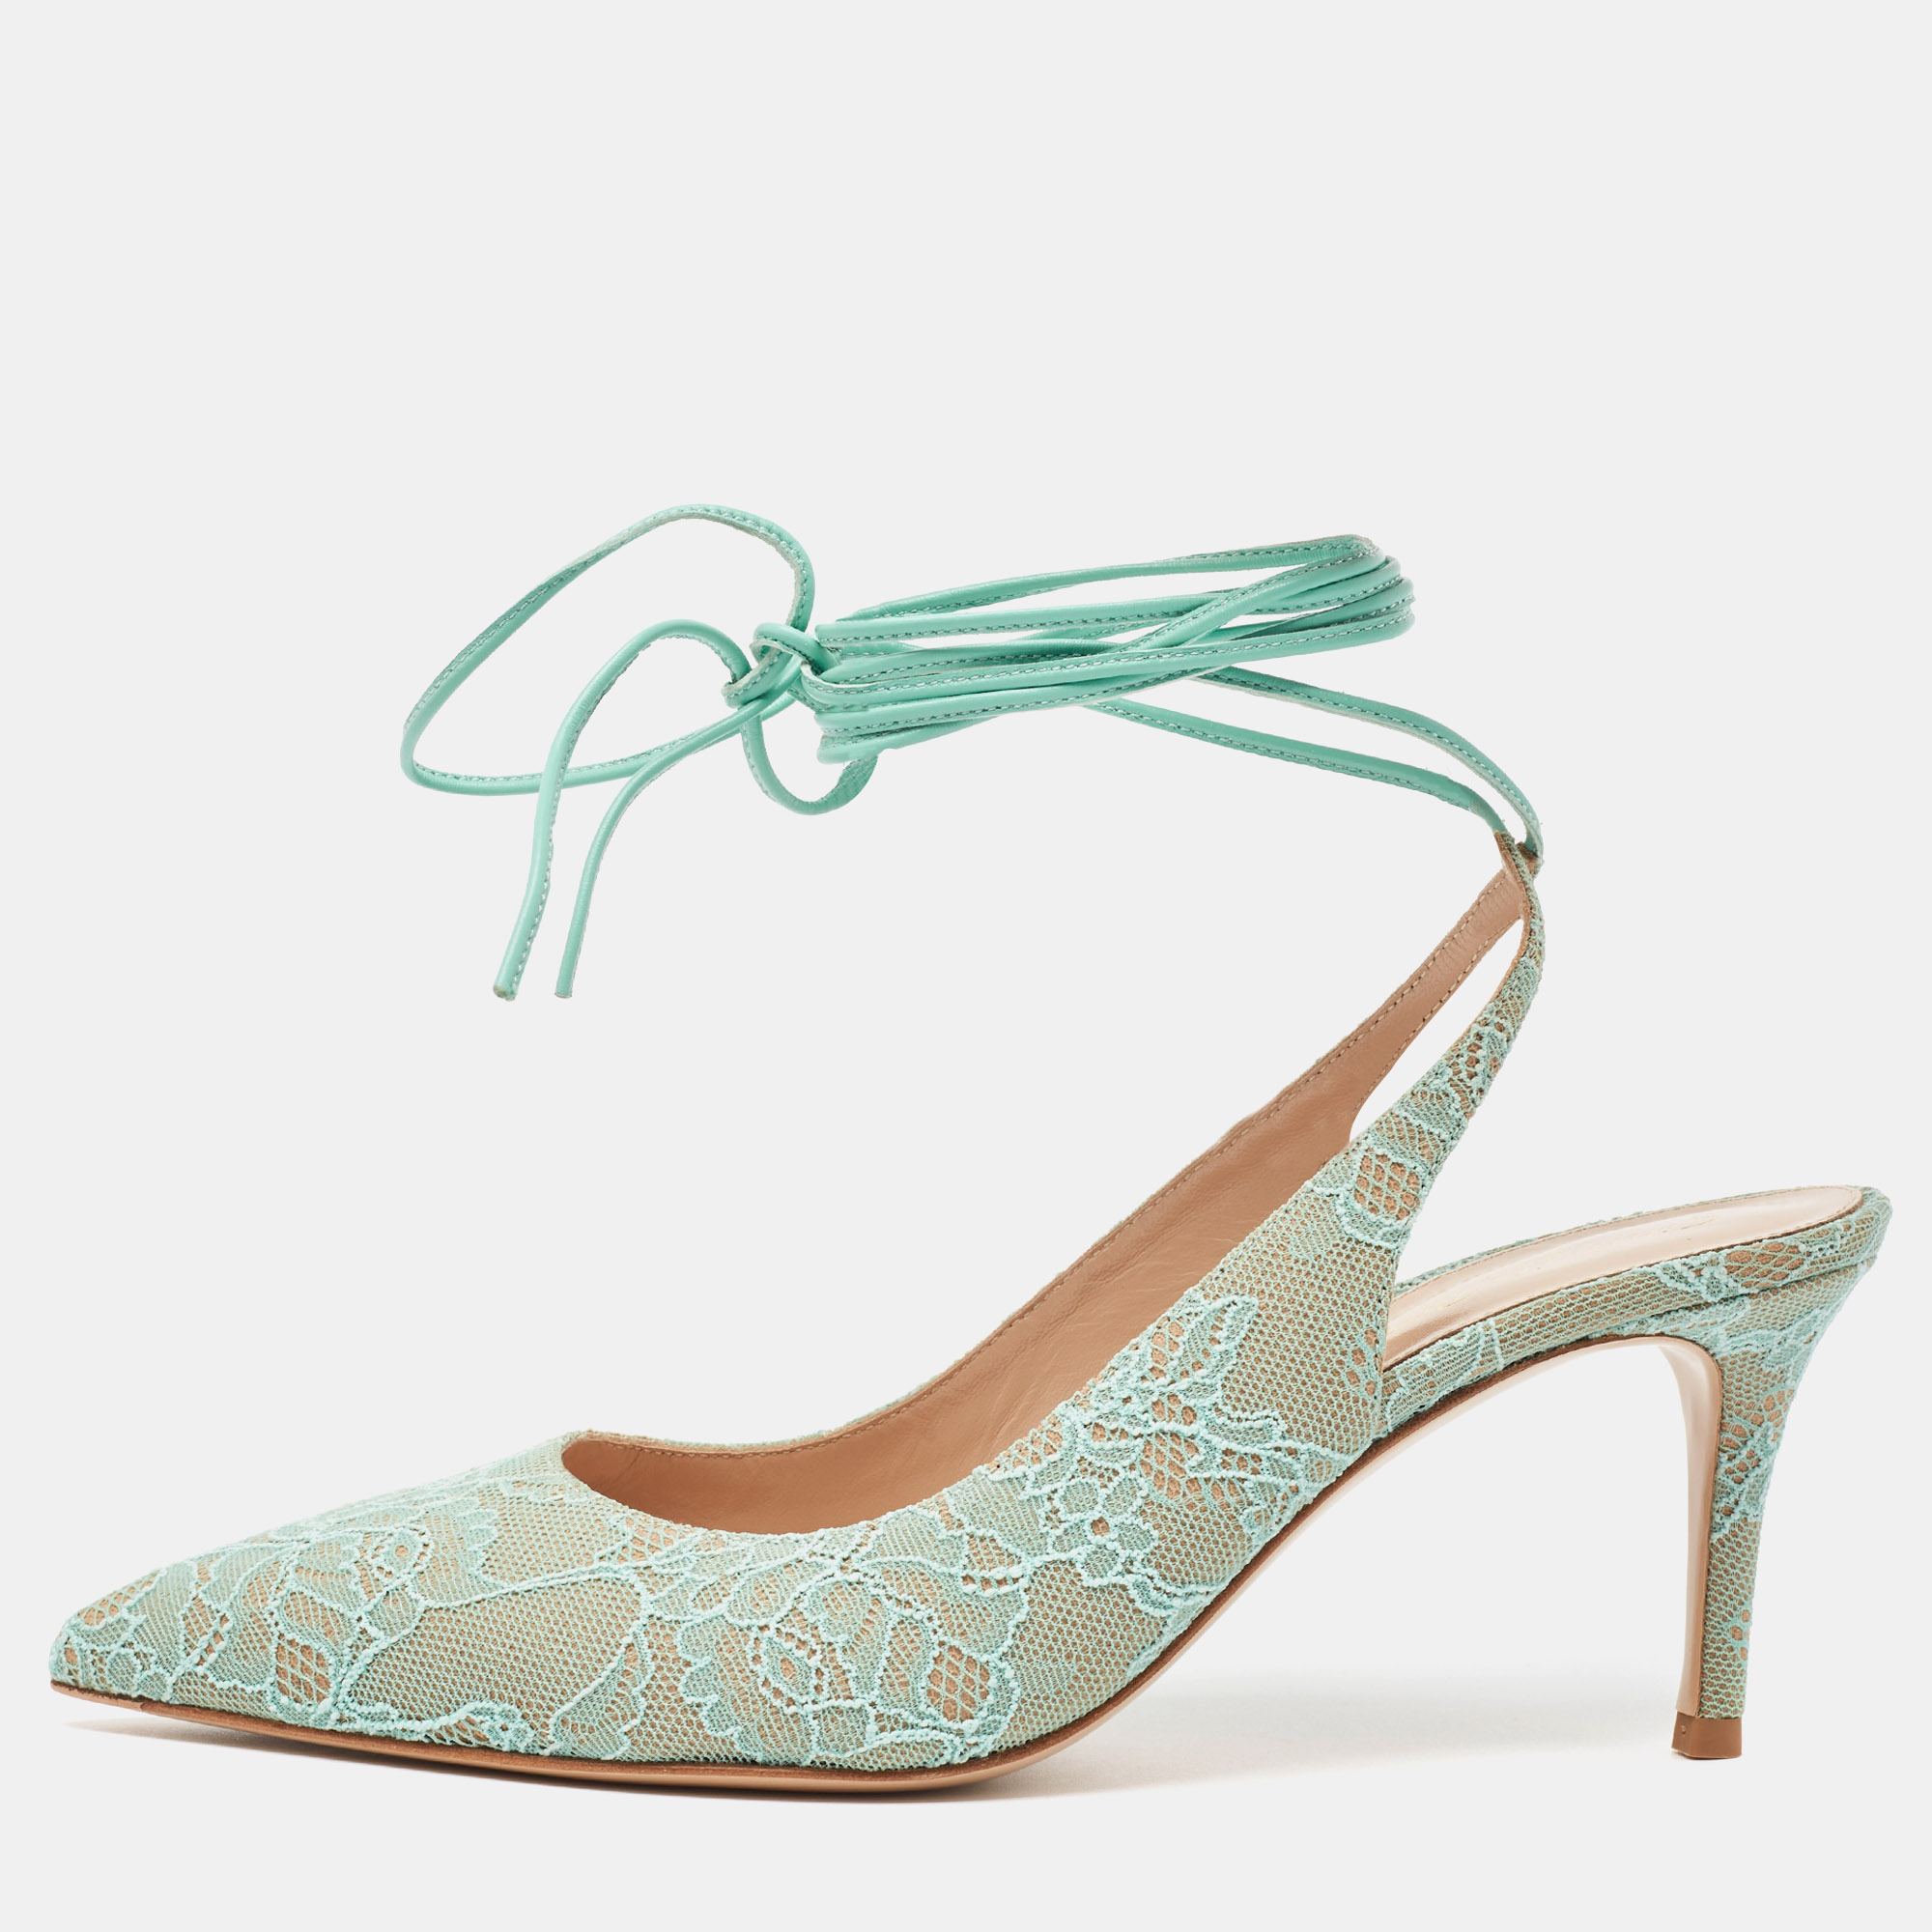 Pre-owned Gianvito Rossi Mint Green Lace Ankle Wrap Slingback Pumps Size 39